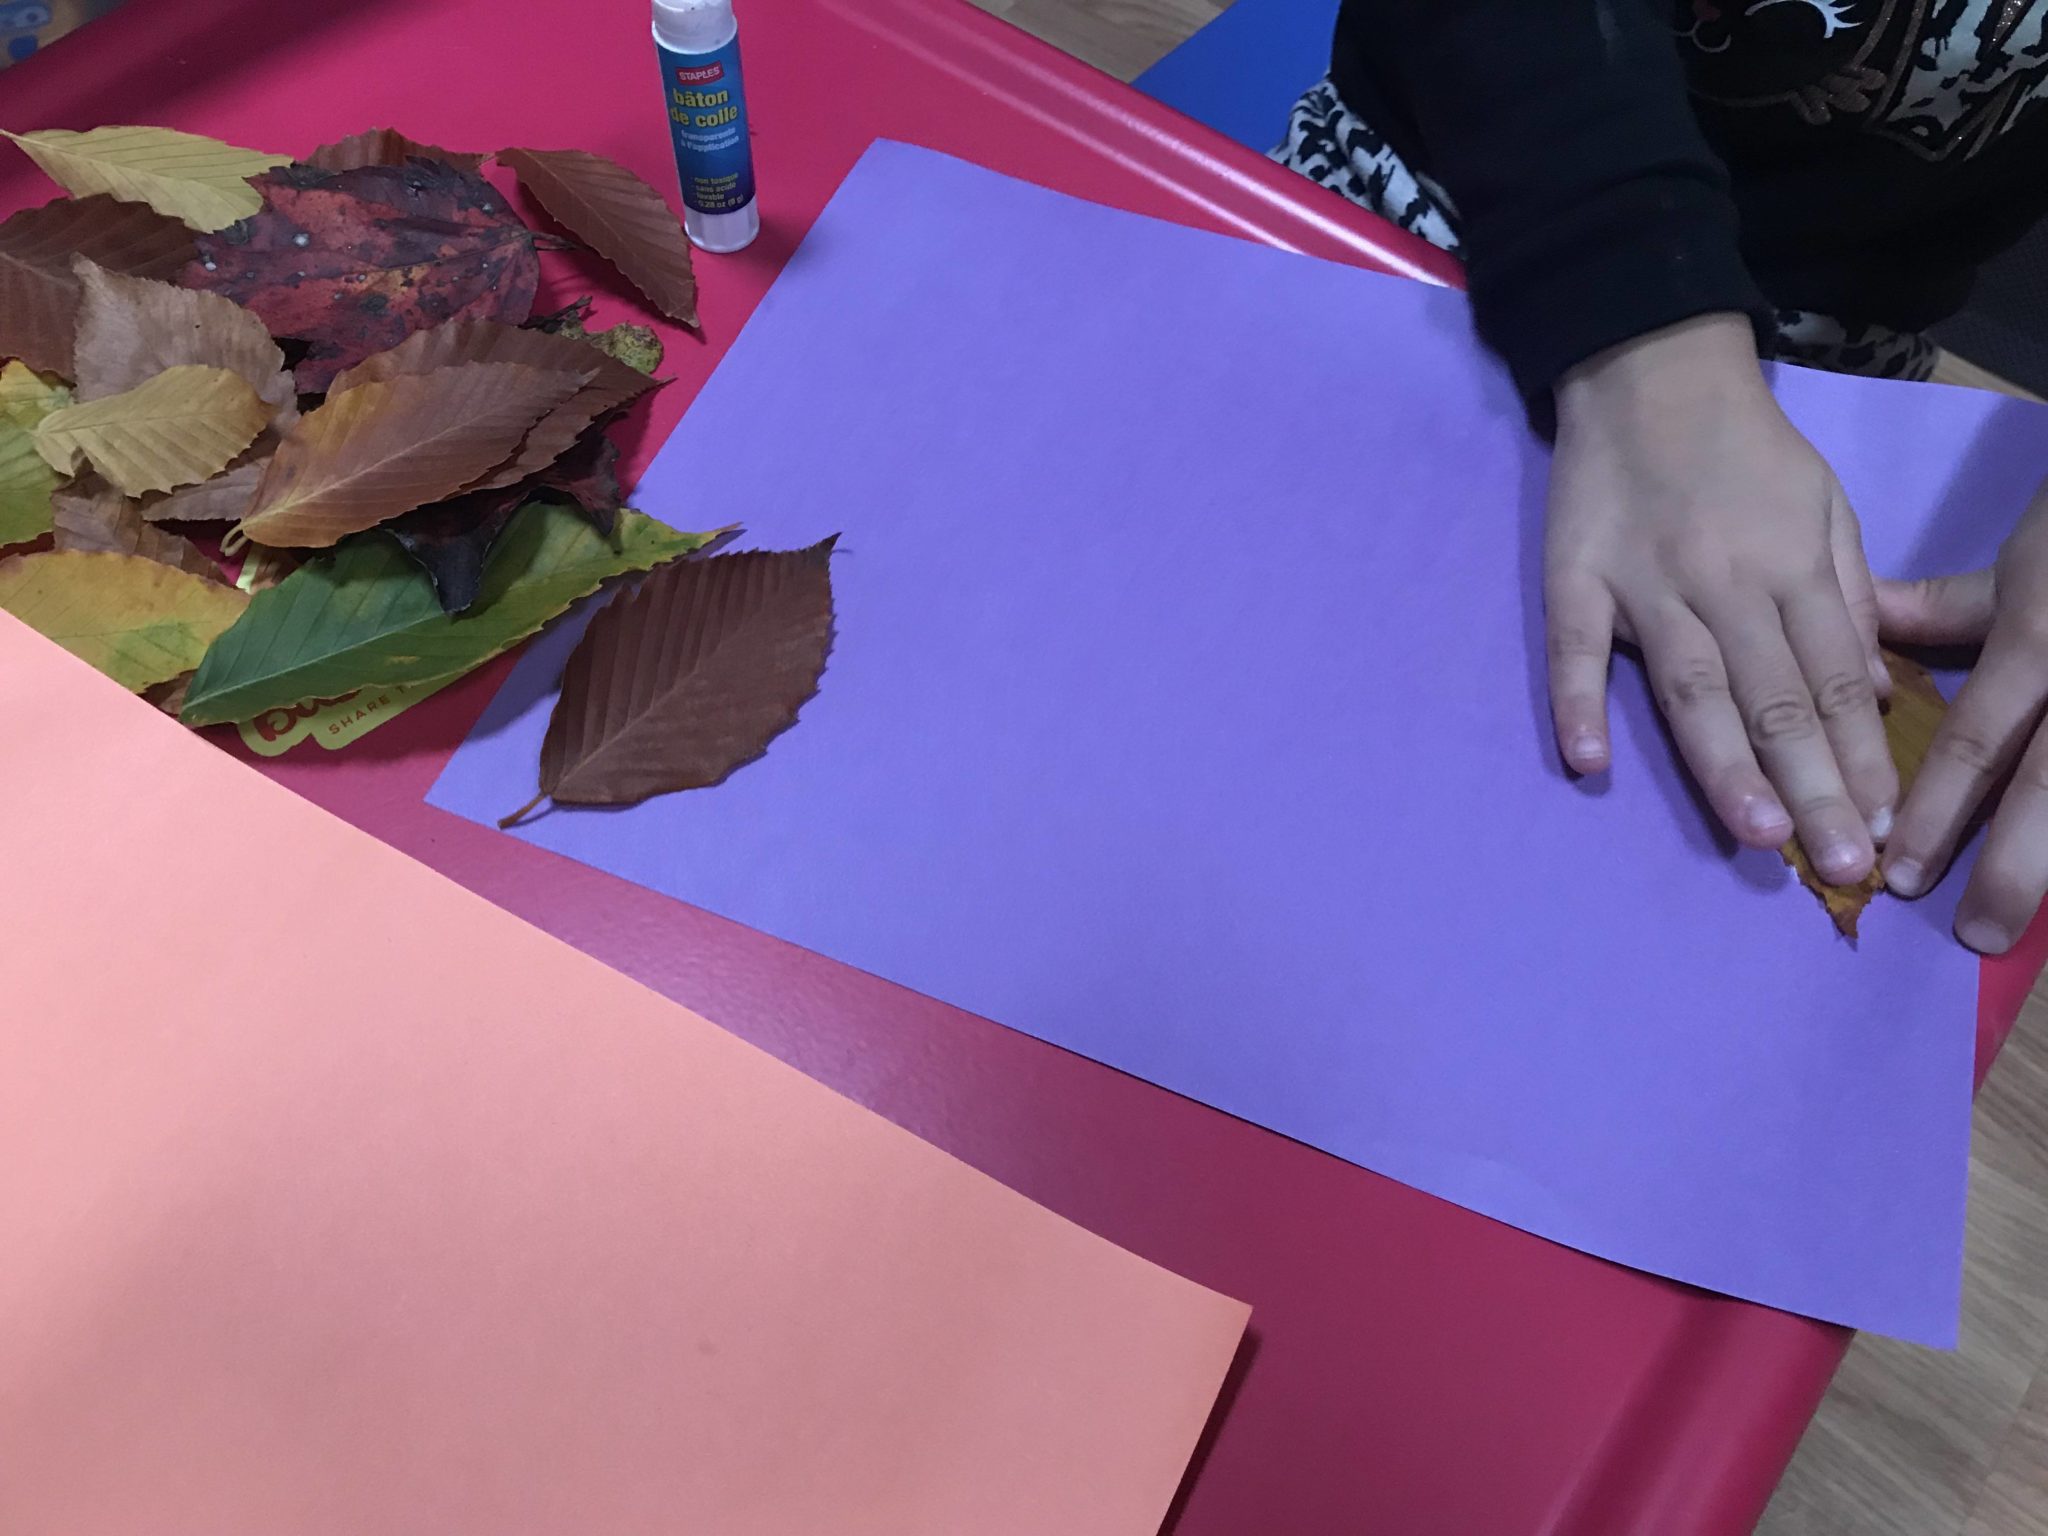 Play with your kids - make these leaf creations!